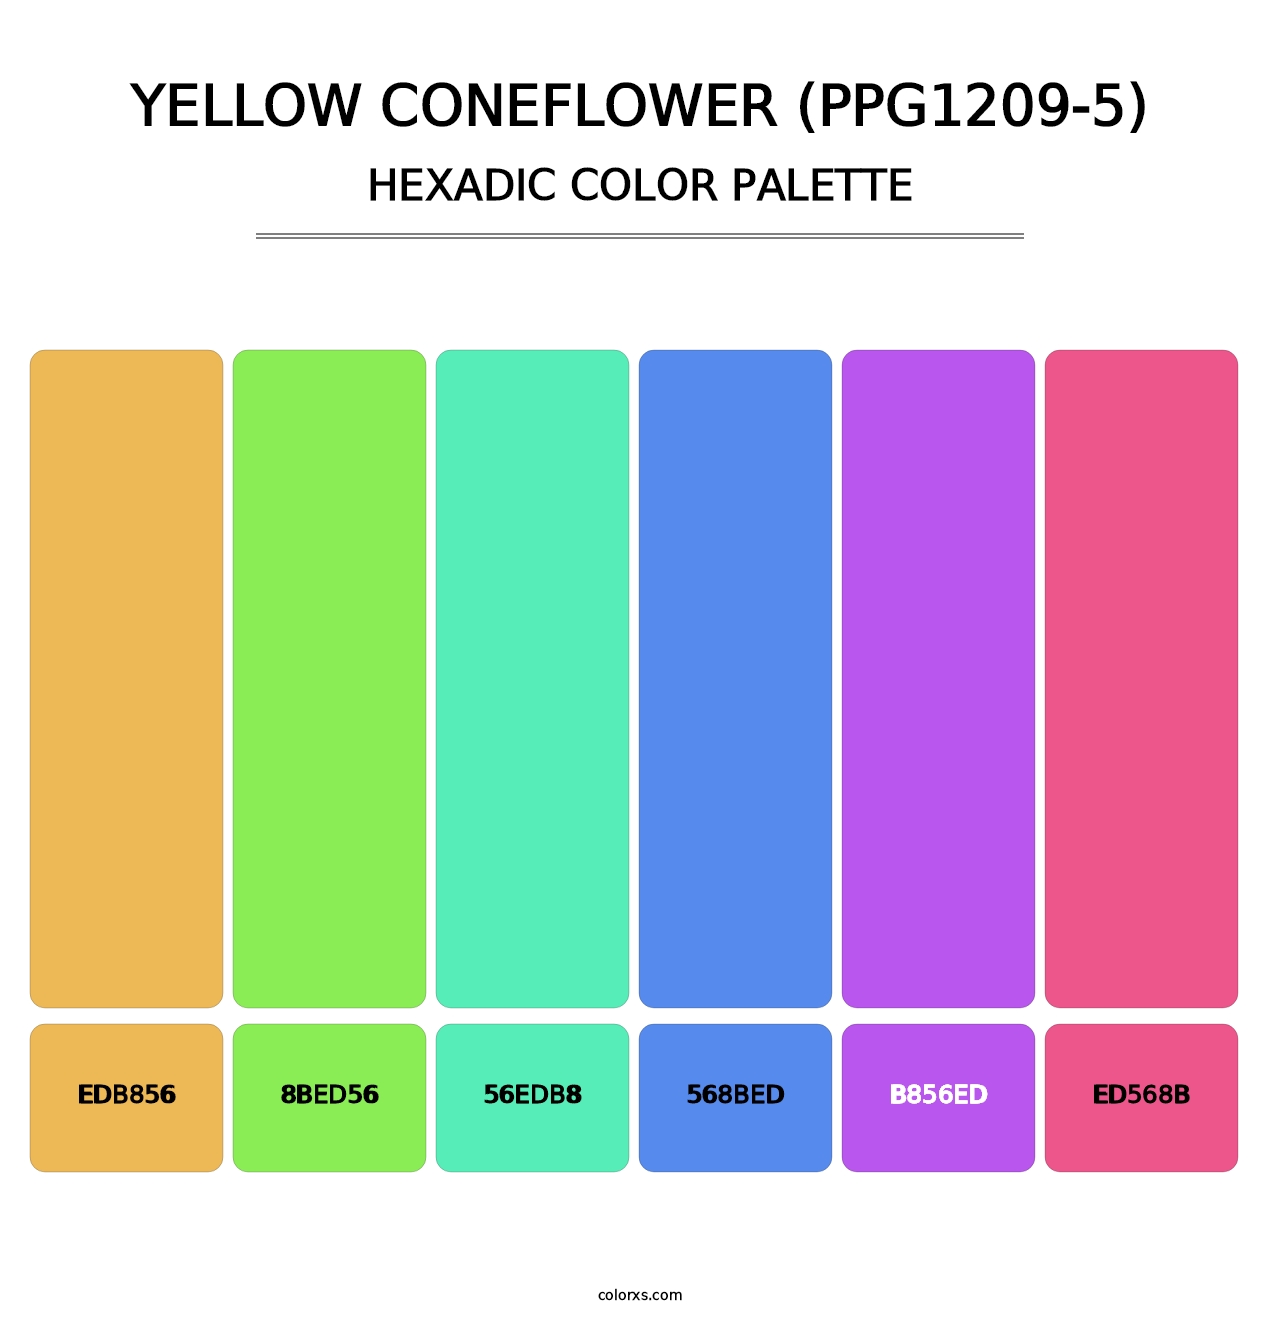 Yellow Coneflower (PPG1209-5) - Hexadic Color Palette